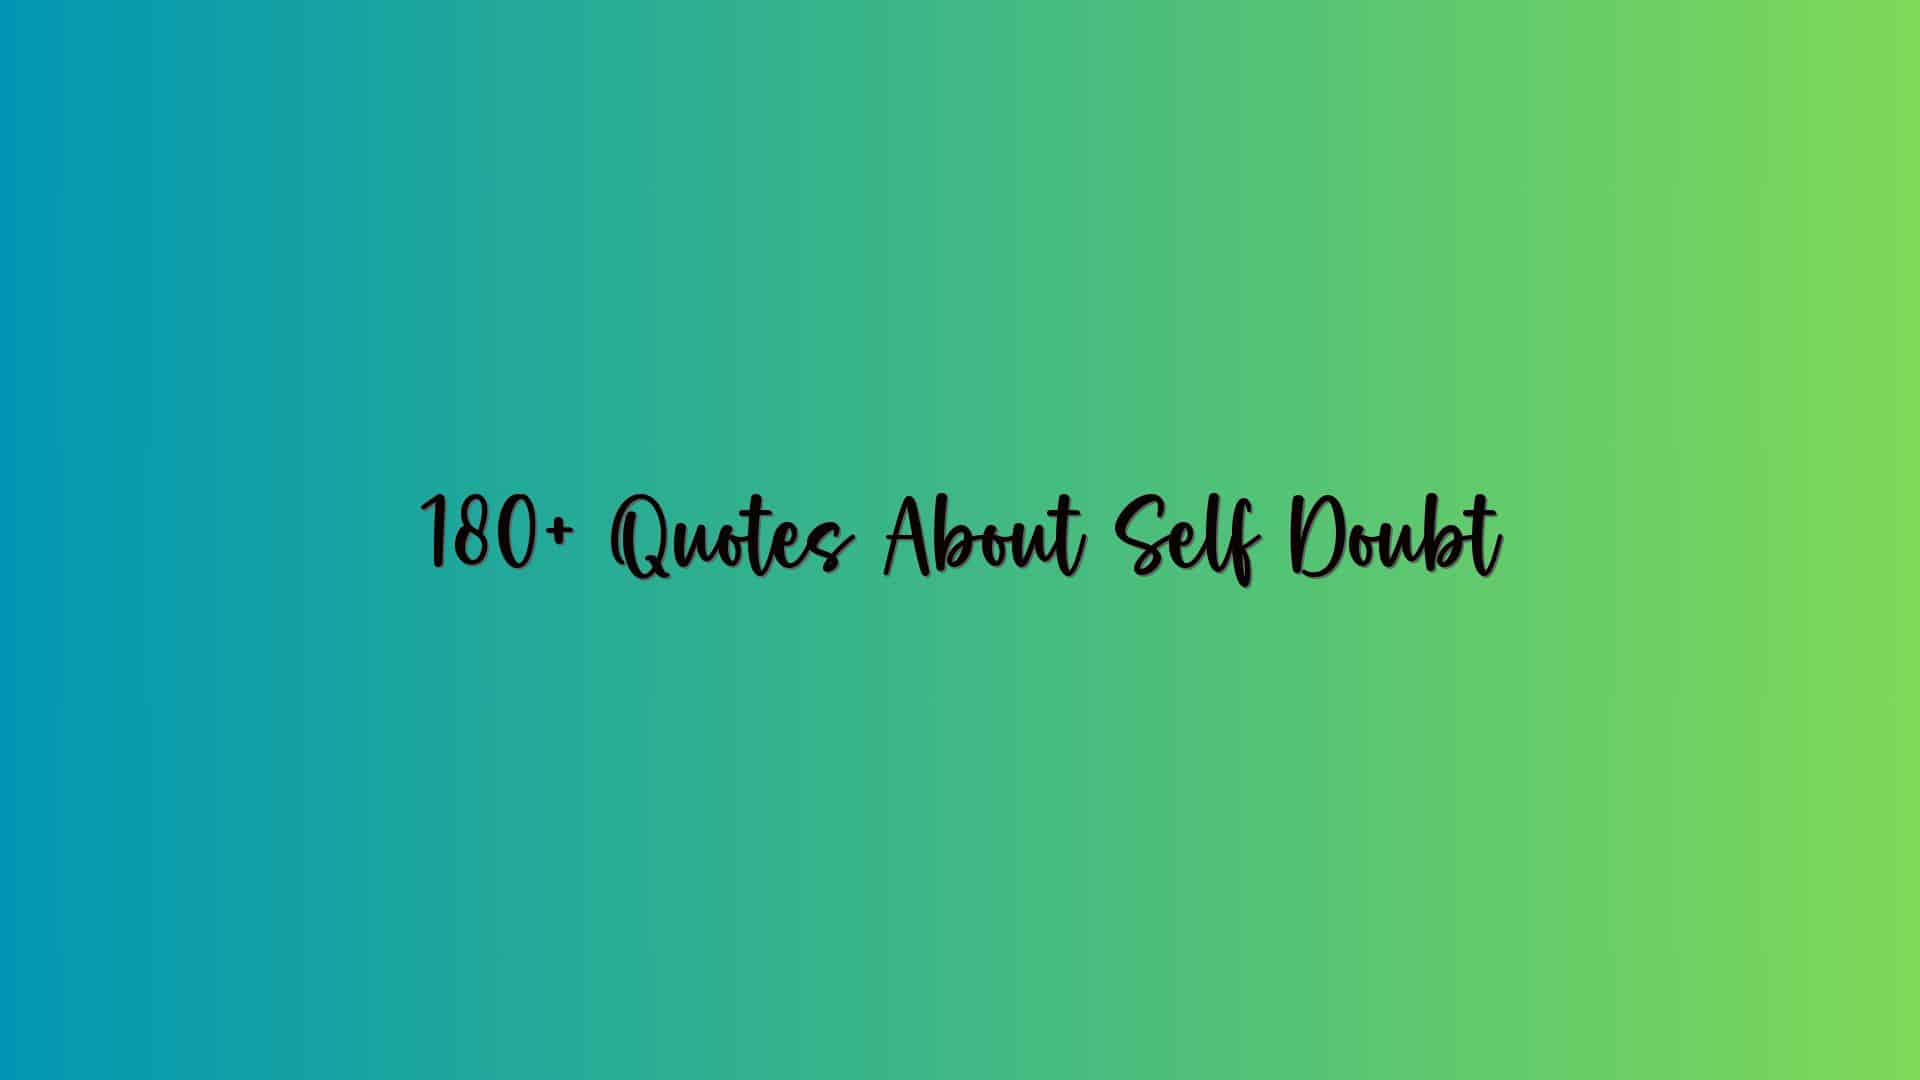 180+ Quotes About Self Doubt